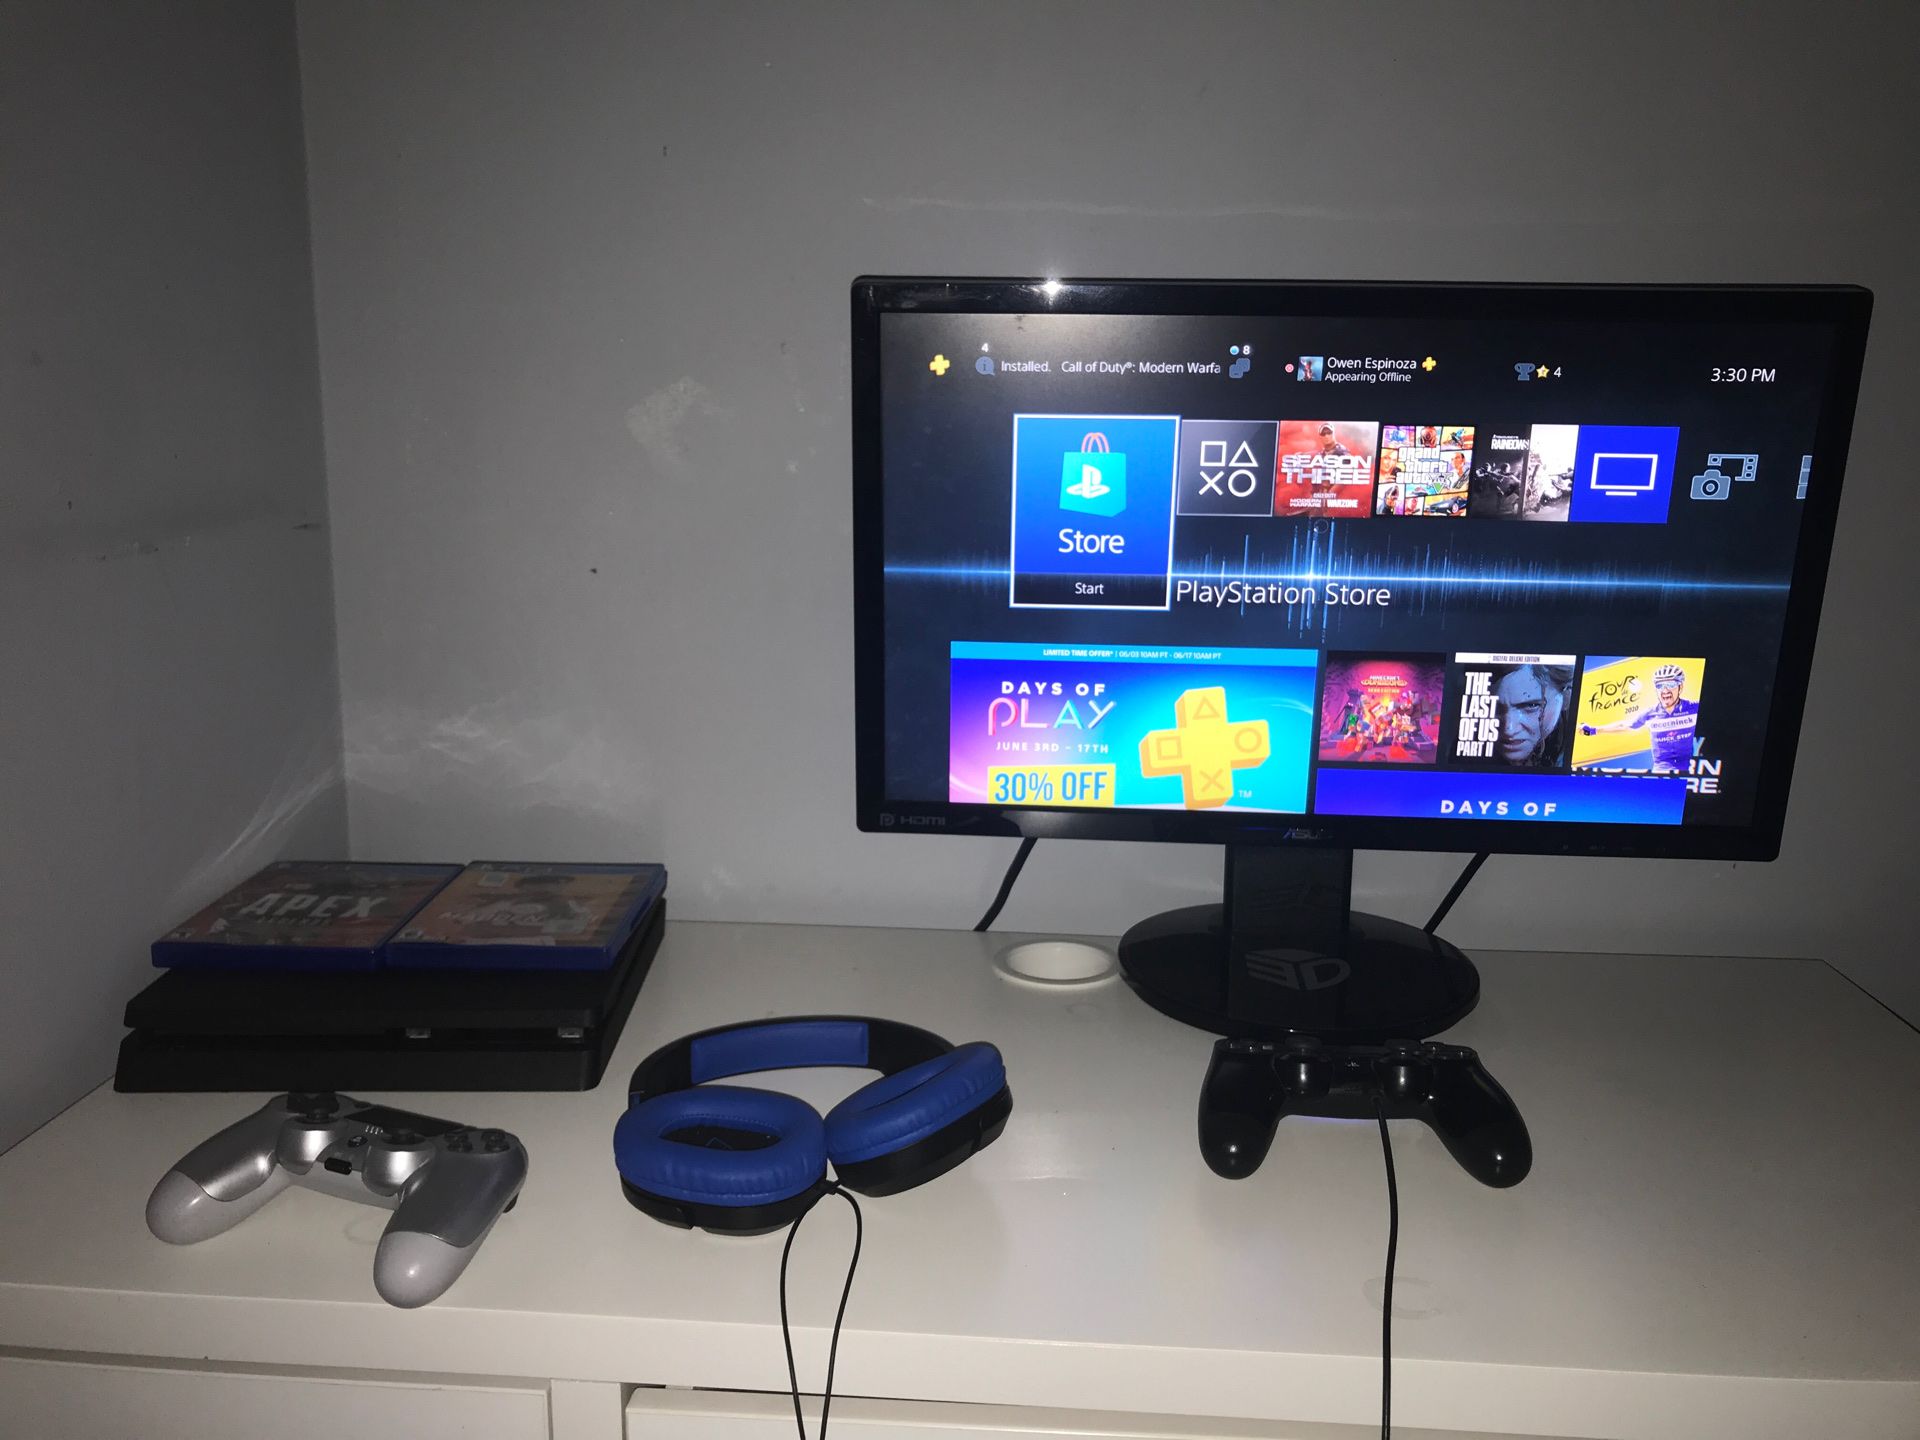 Ps4 setup with 2 accounts and games